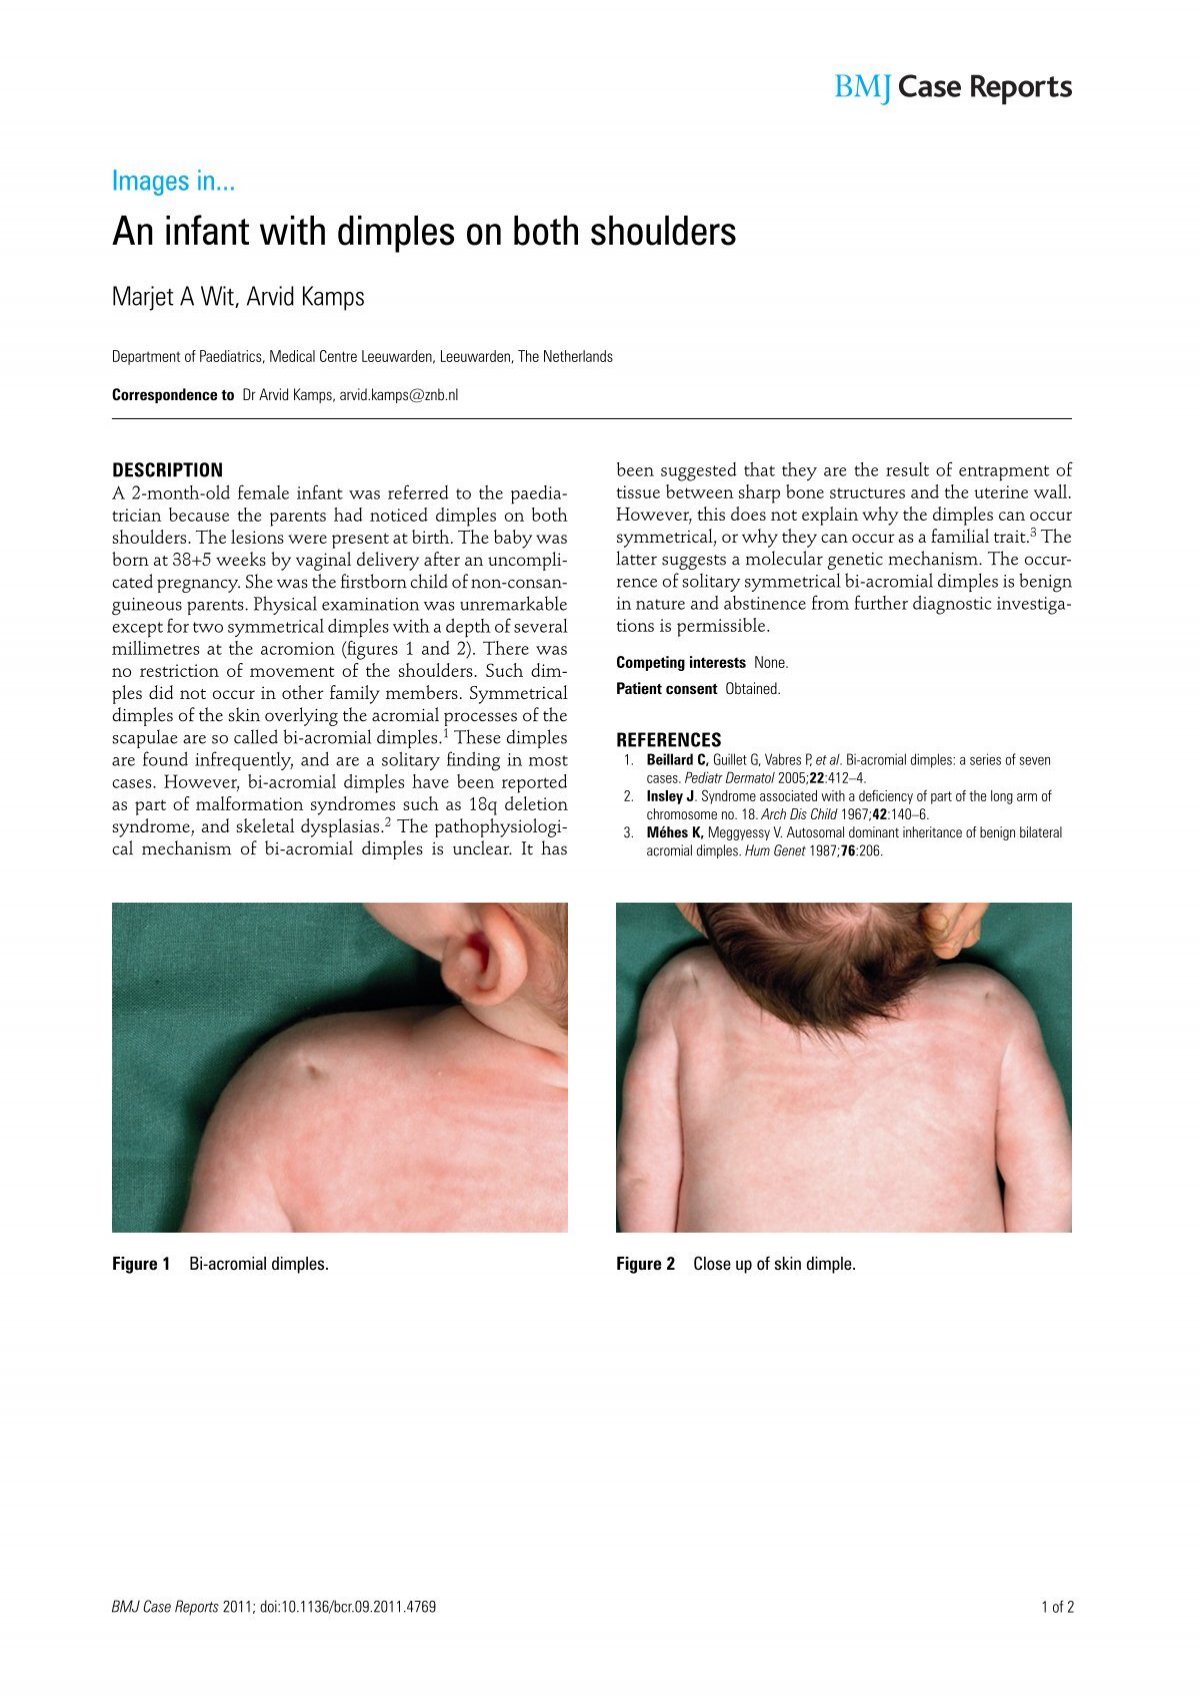 An Infant With Dimples On Both Shoulders Bmj Case Reports